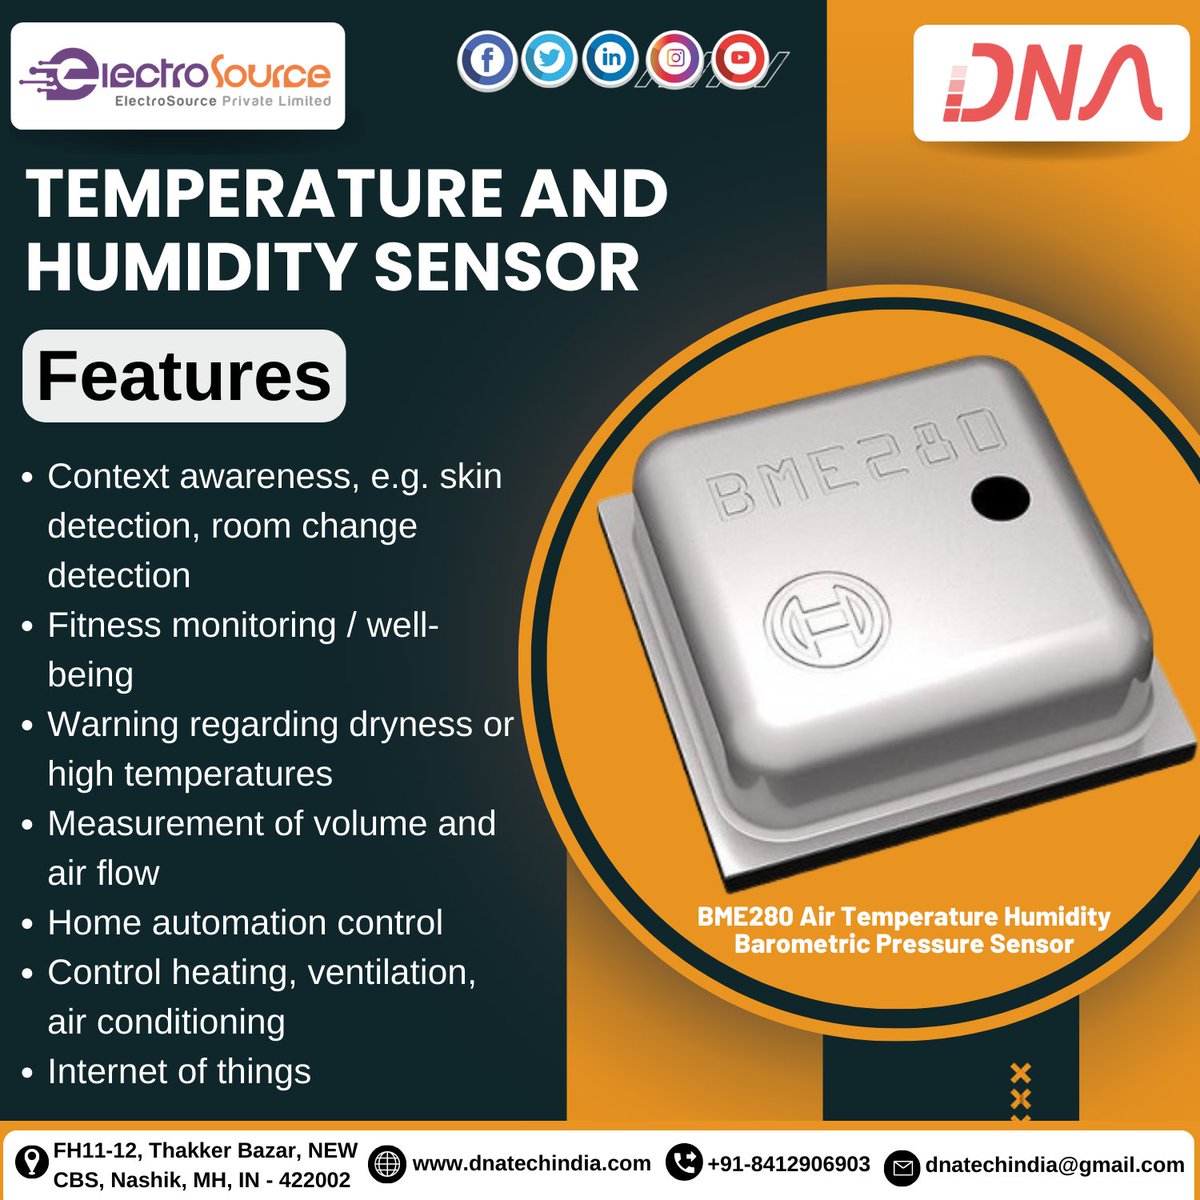 Temperature and Humidity Sensor
BME280 Air Temperature Humidity Barometric Pressure Sensor
#temperature #humiditysensor #context #awareness #skindetection #changedetection #fitnessmonitoring #wellbeing #fitnessmonitoring #warning #regarding #hightemprature #measurment #flow